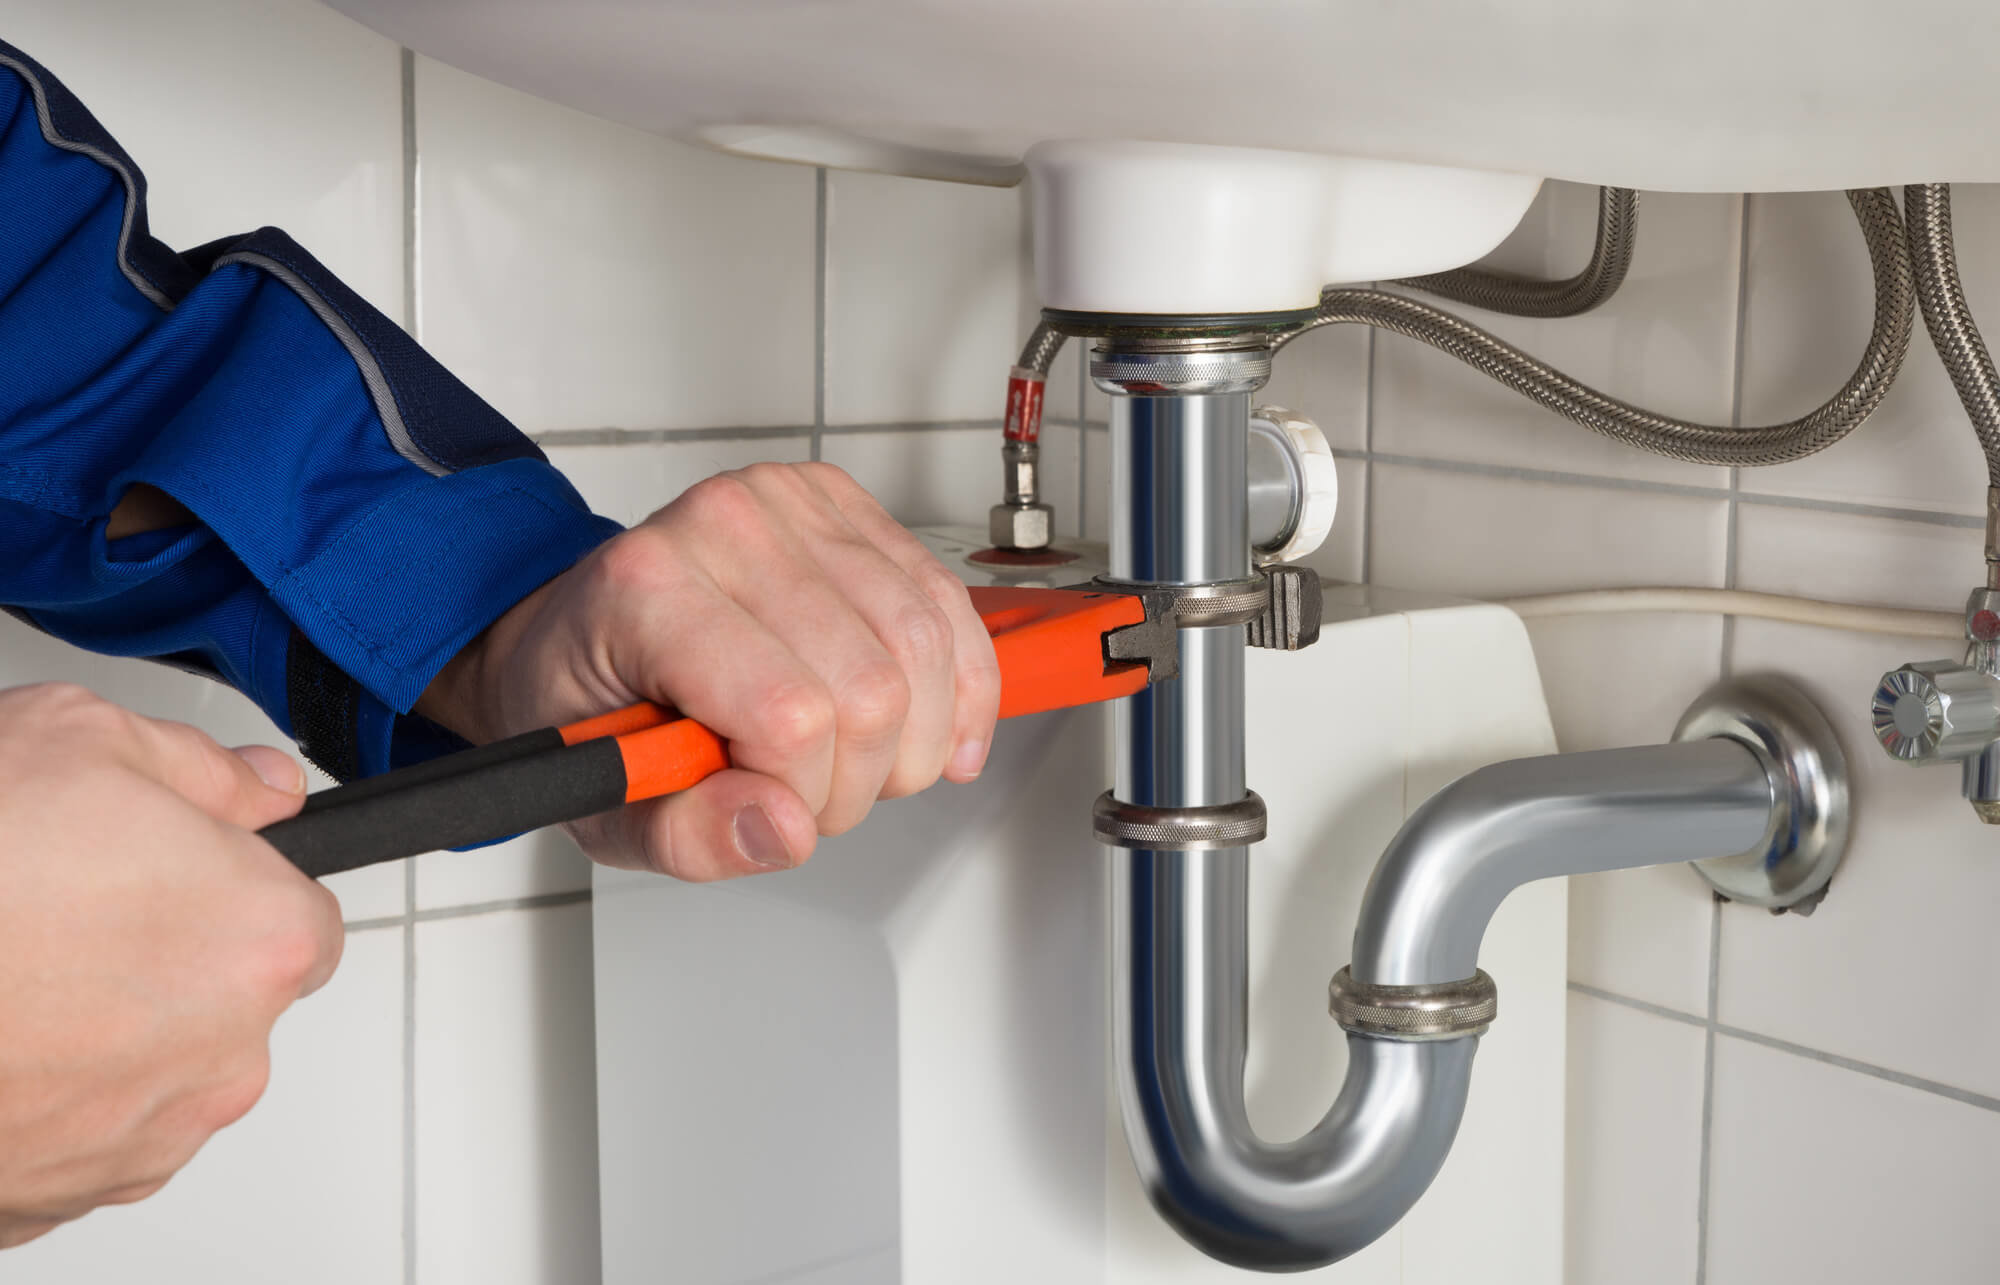 how-does-plumbing-work-e1548696261445